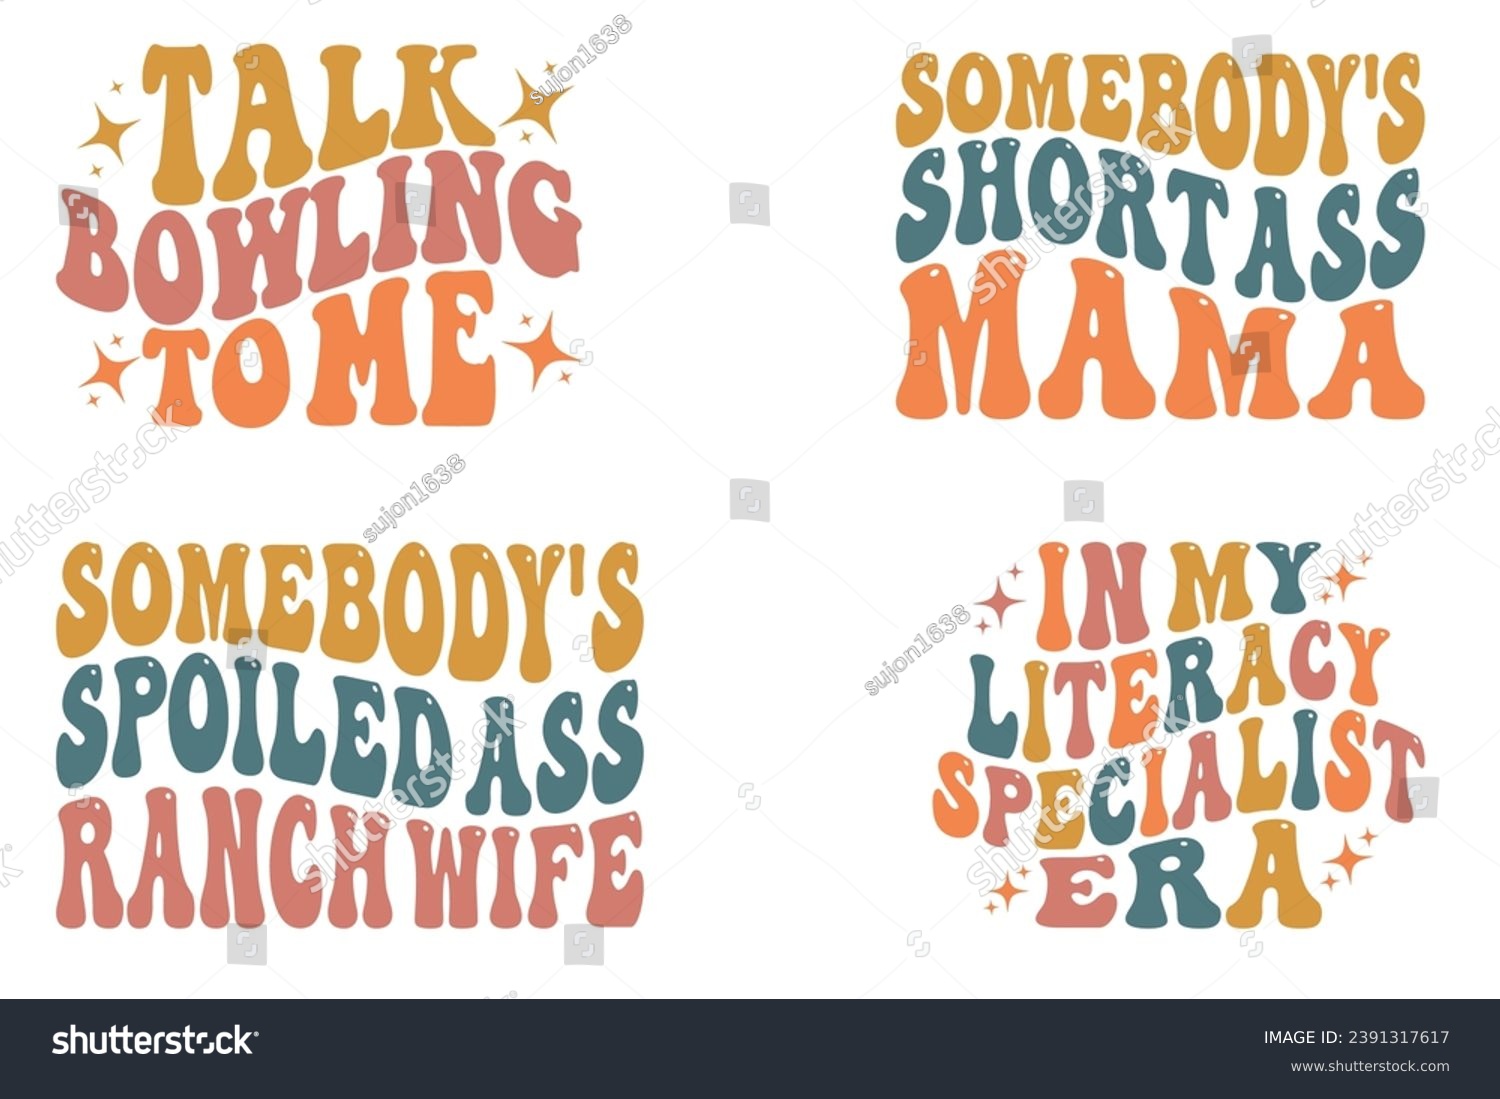 SVG of Talk Bowling To Me, Somebody's Short Ass mama, Somebody's Spoiled Ass Ranch Wife, In My Literacy Specialist Era retro wavy T-shirt designs svg